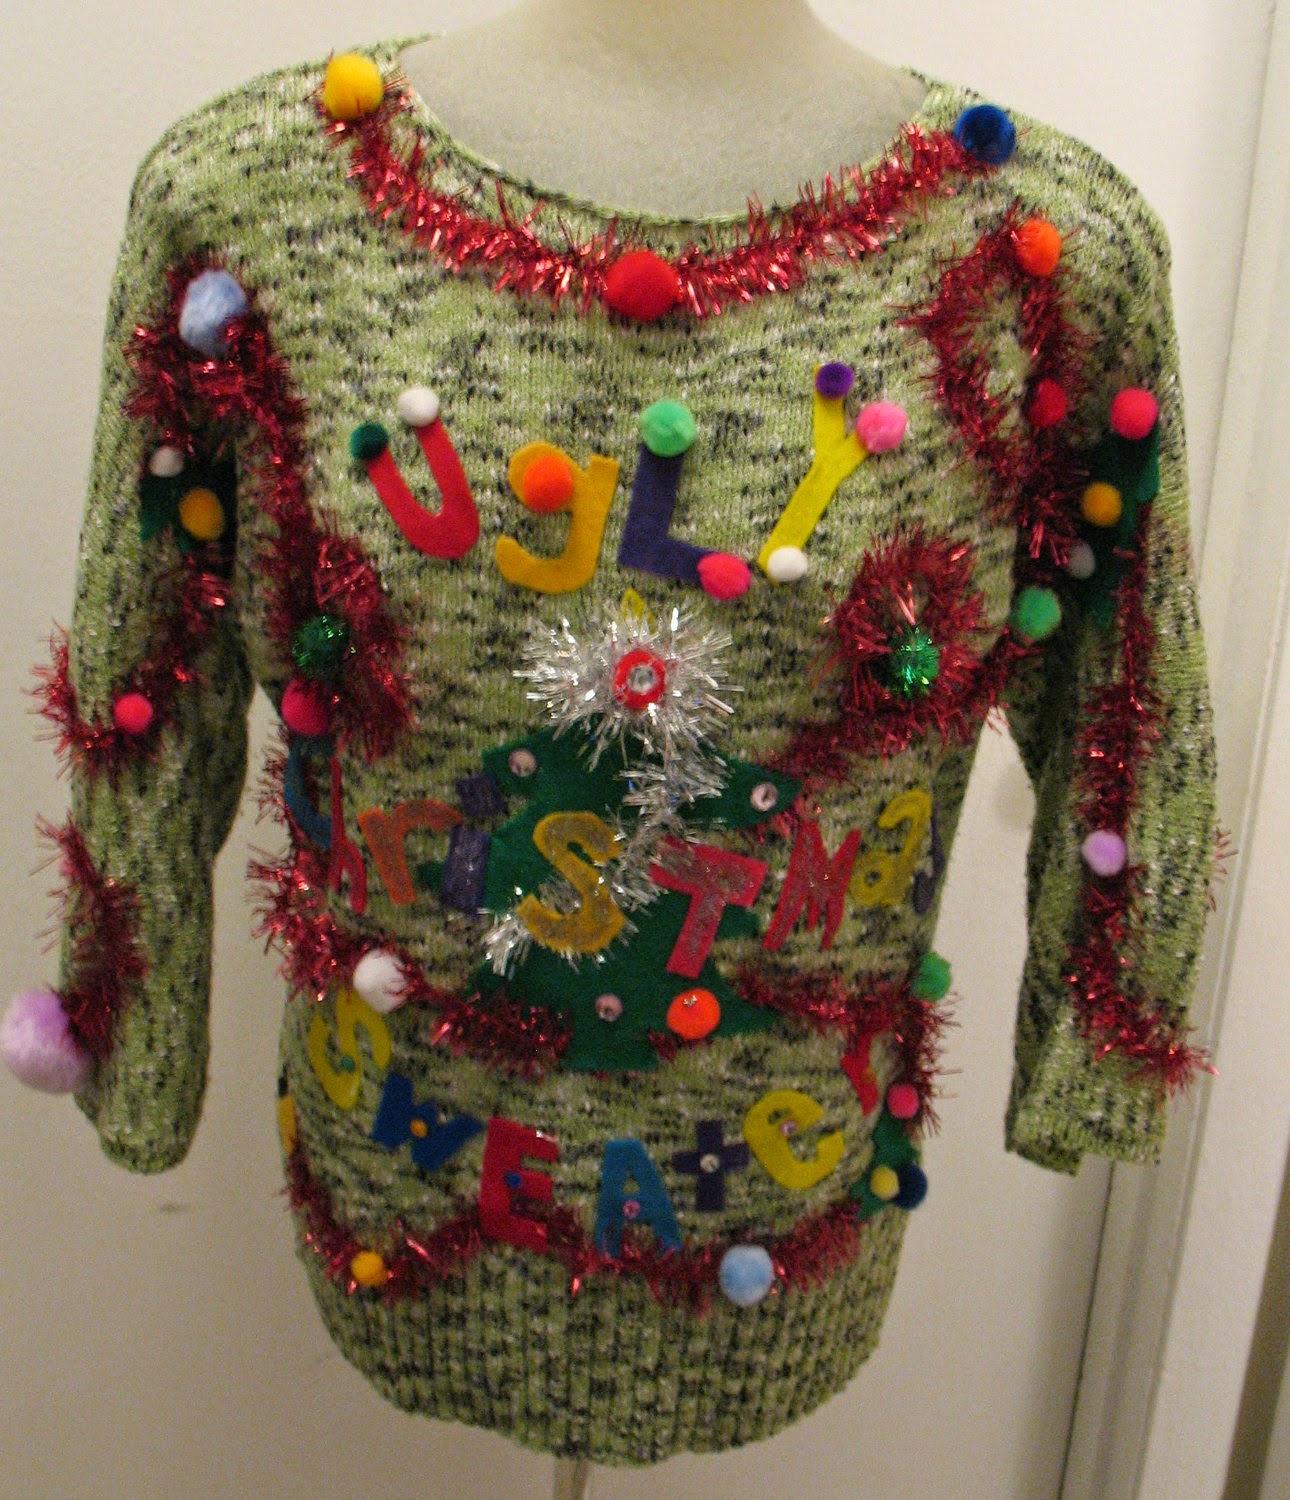 South Florida Postal Blog: The 'Return' of the Ugly Sweater